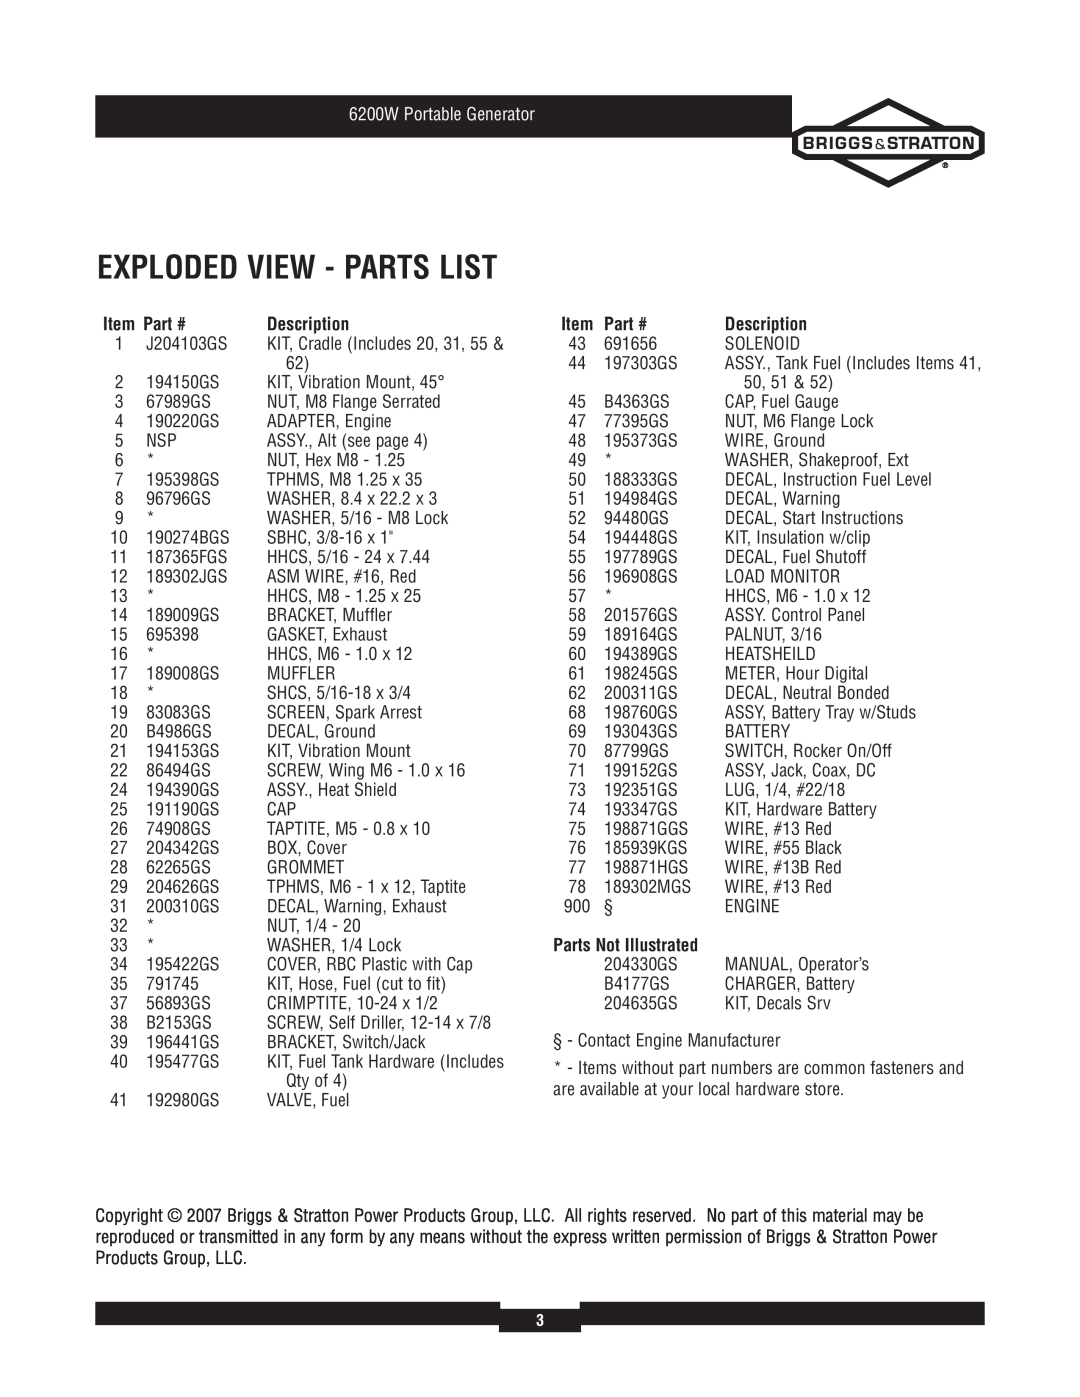 Briggs & Stratton 30358 manual Exploded View - Parts List, Item Part #, Description, Parts Not Illustrated 